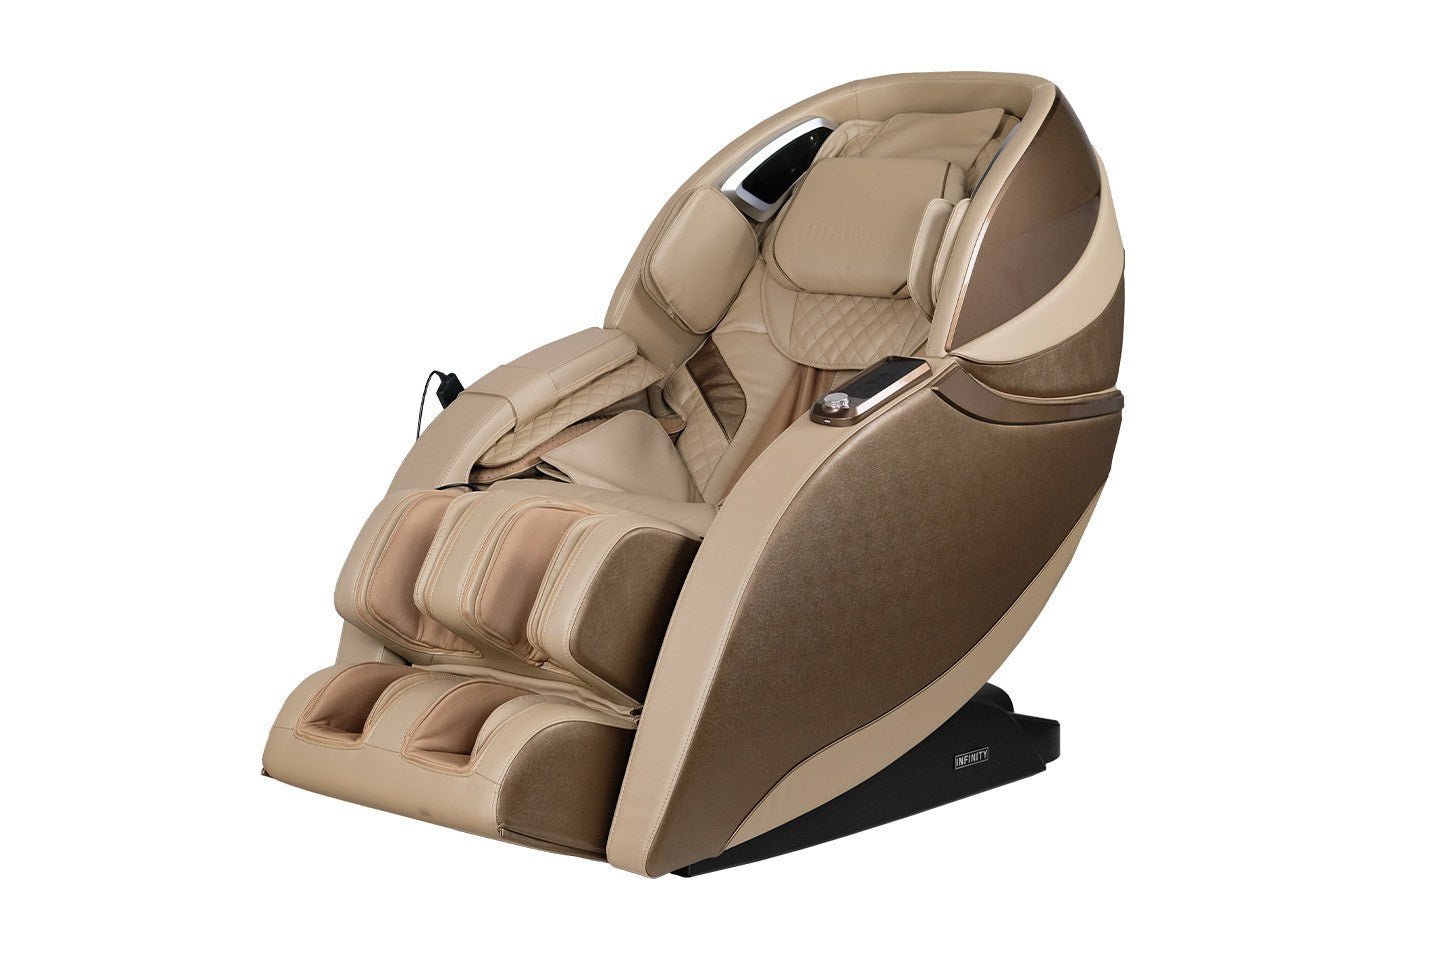 Infinity Infinity Evolution Max™ 4D Massage Chair (Certified Pre-Owned) 987125511_Grd B Massage Chairs Topture